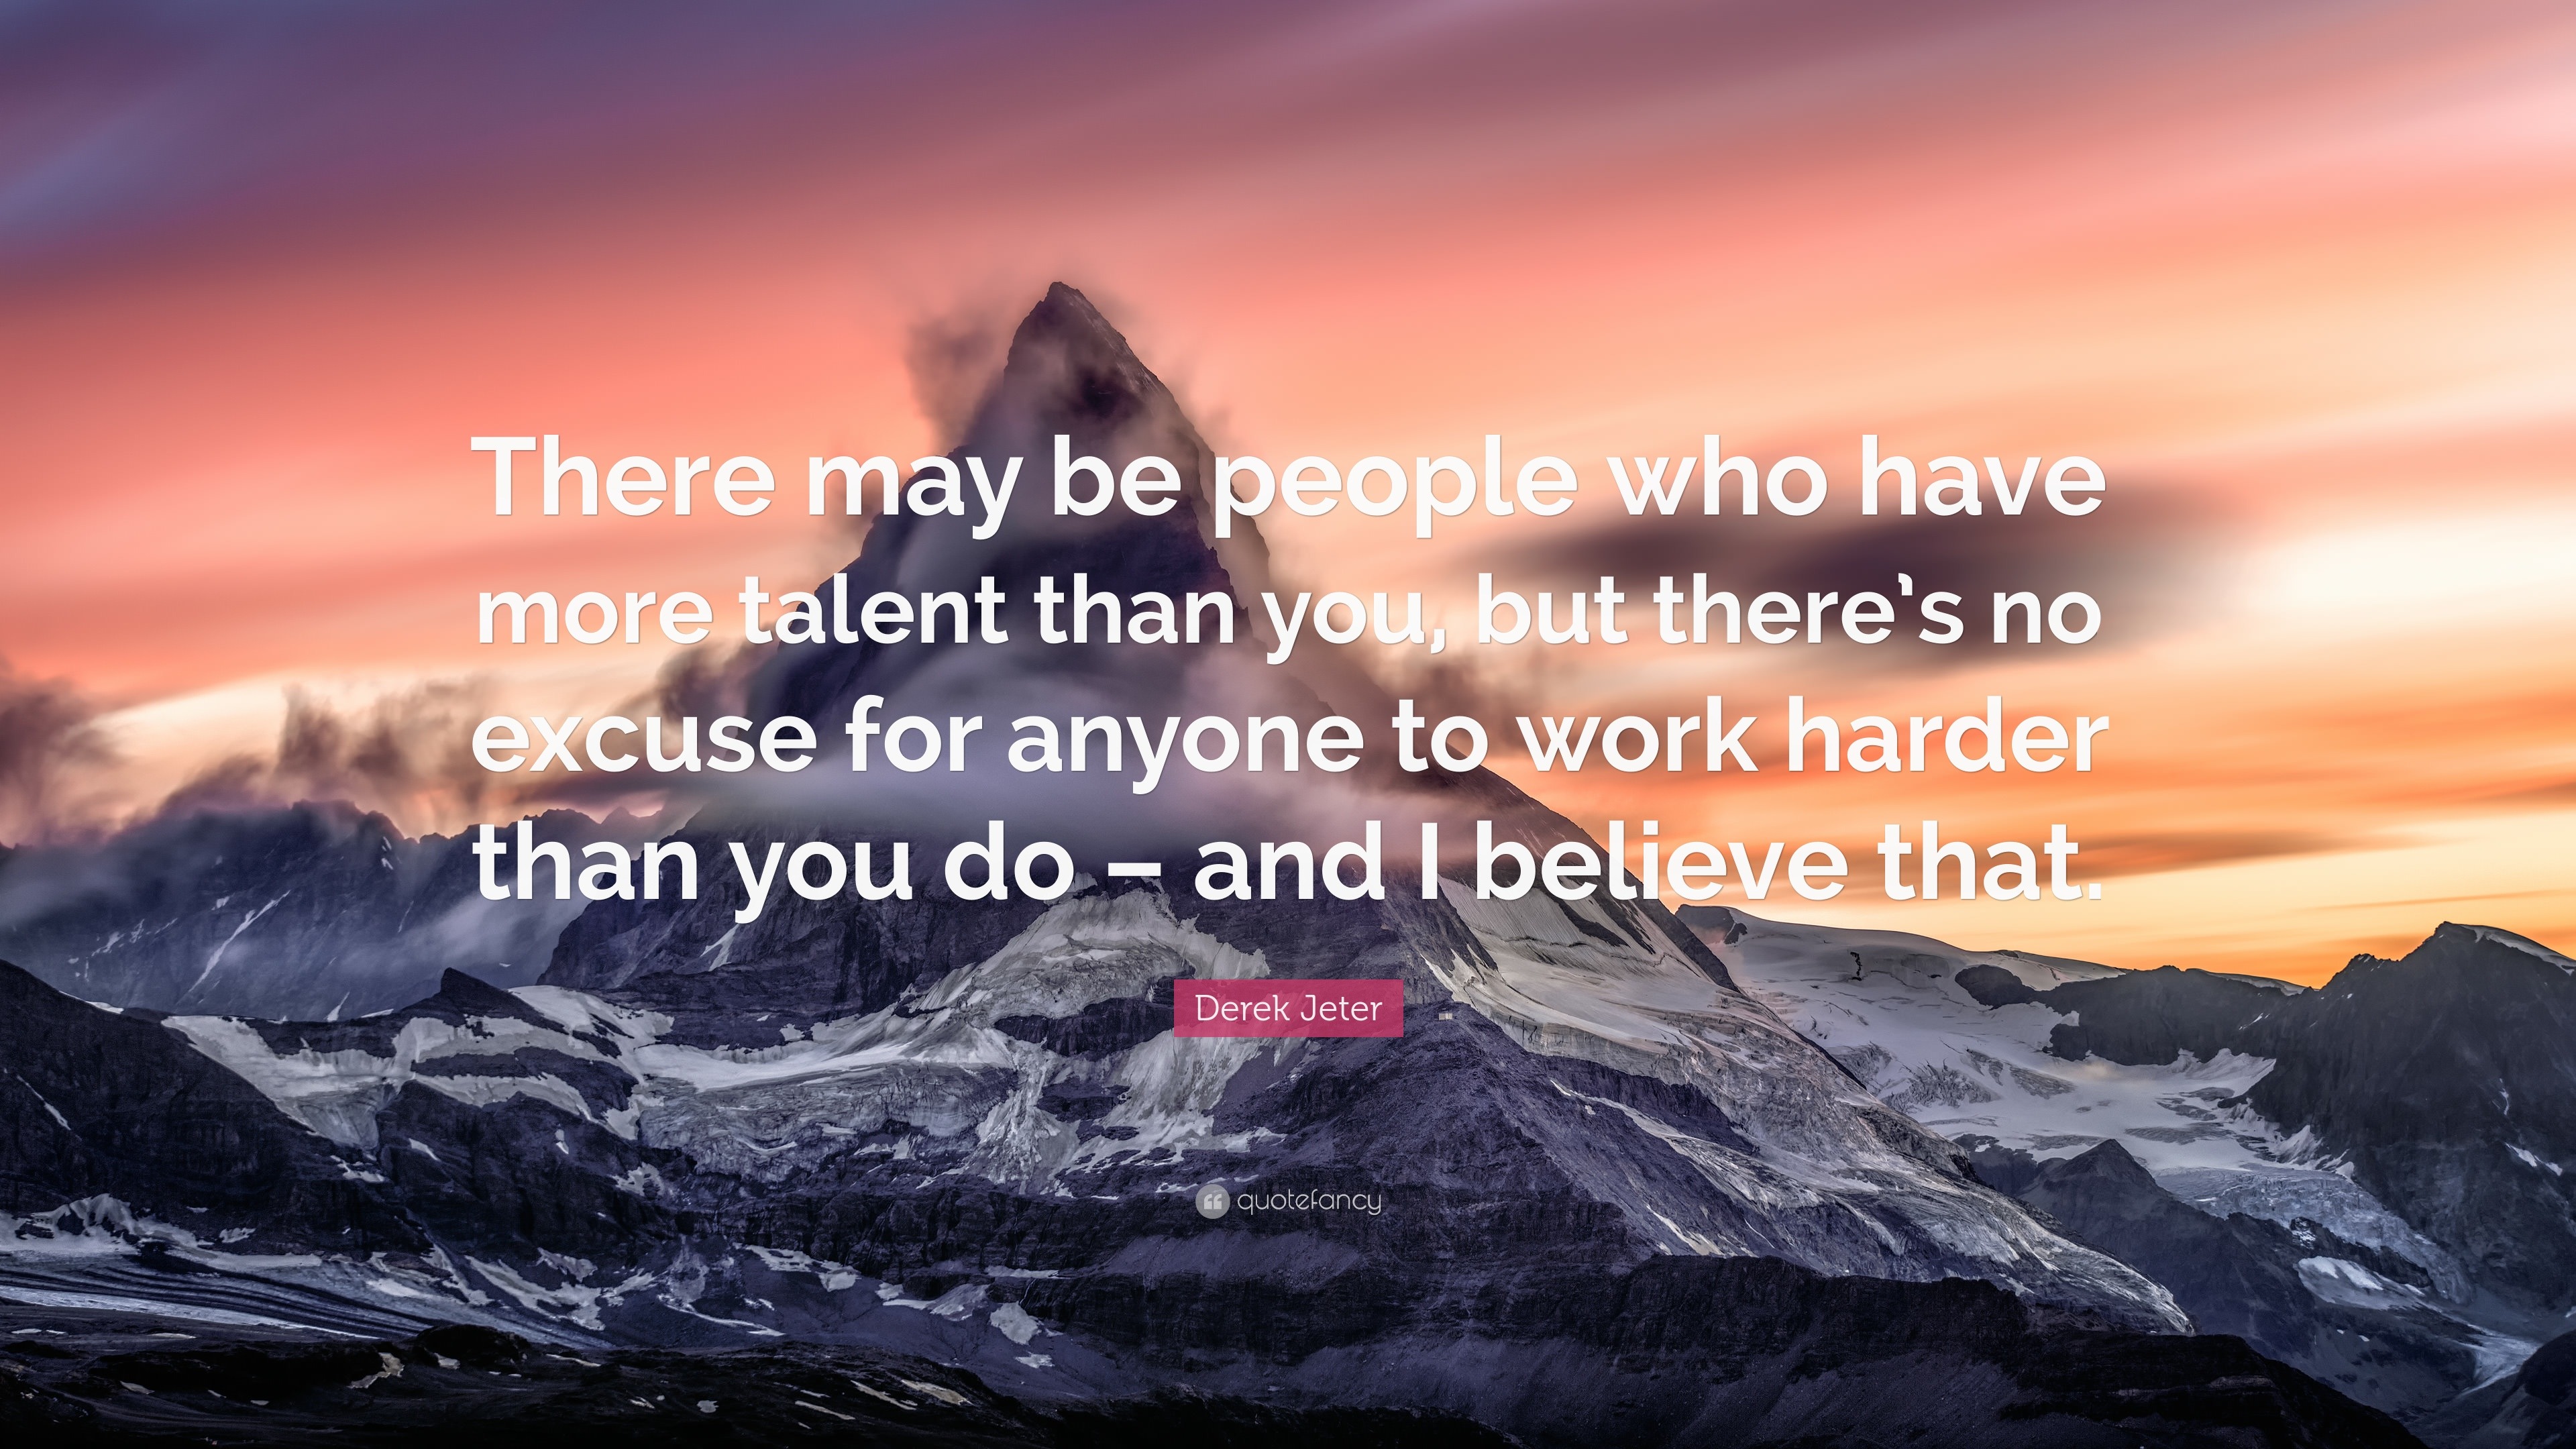 Derek Jeter Quote There May Be People Who Have More Talent Than You But Theres No Excuse For